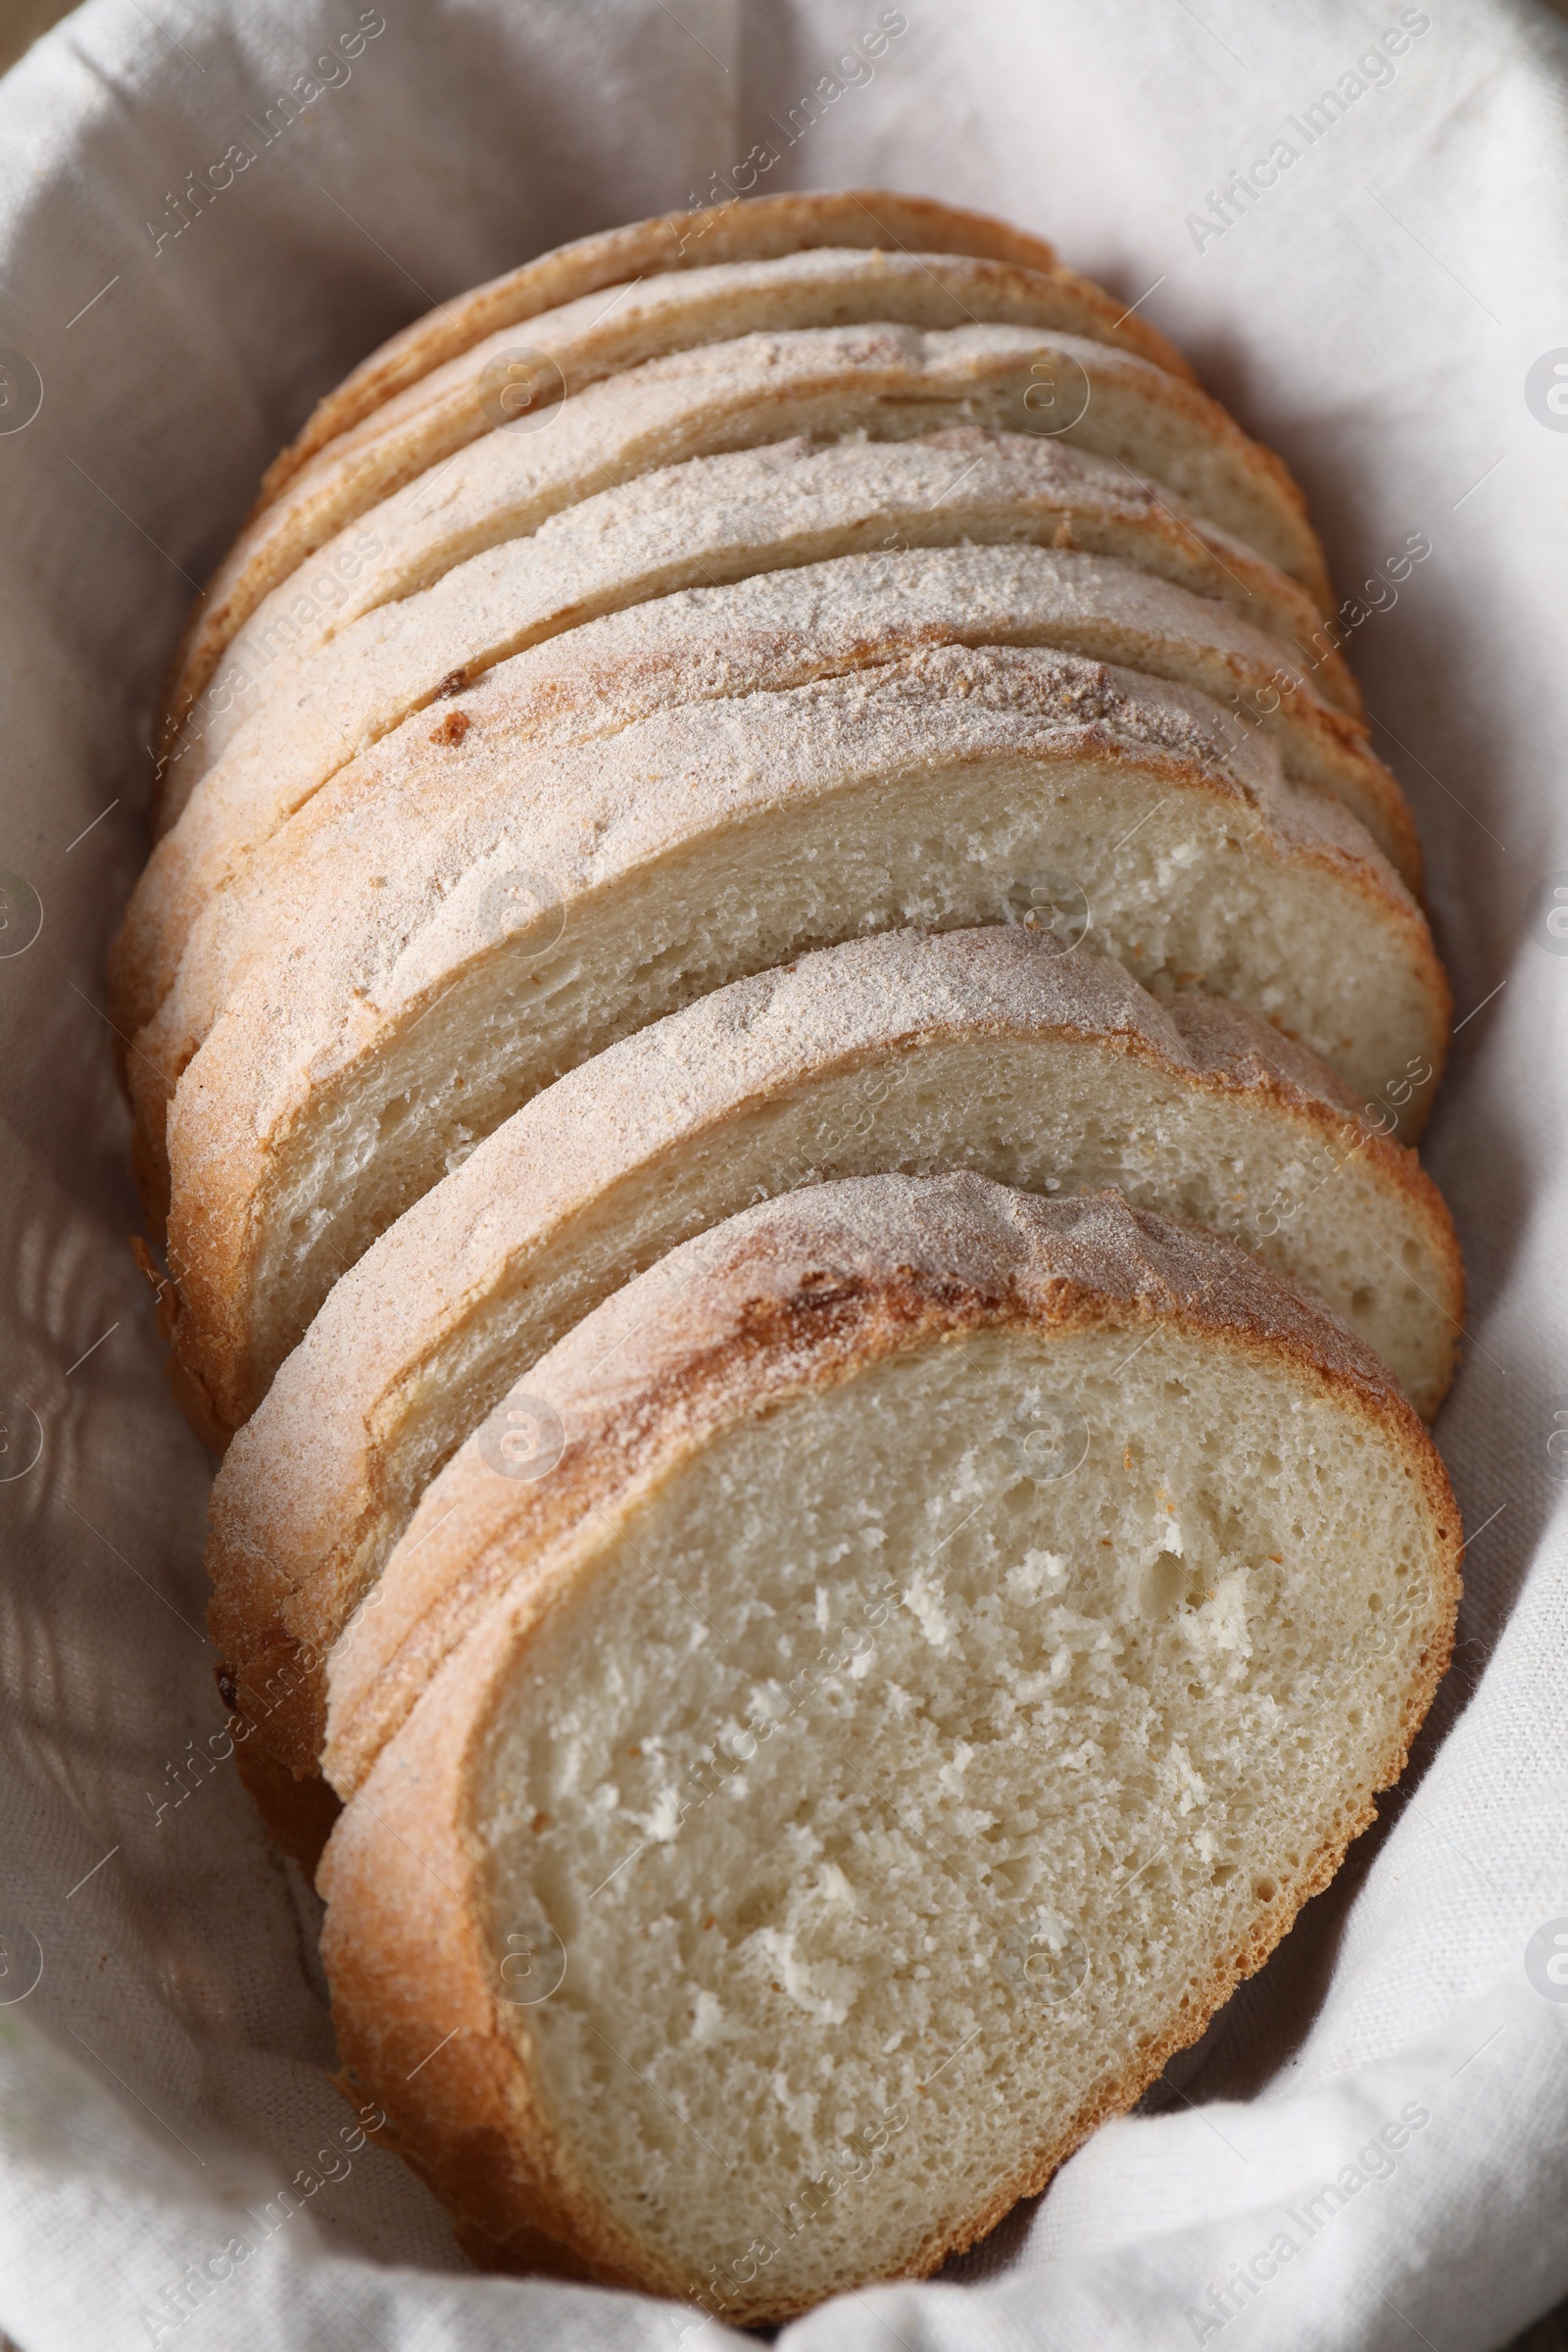 Photo of Slices of fresh bread on cloth in basket, above view